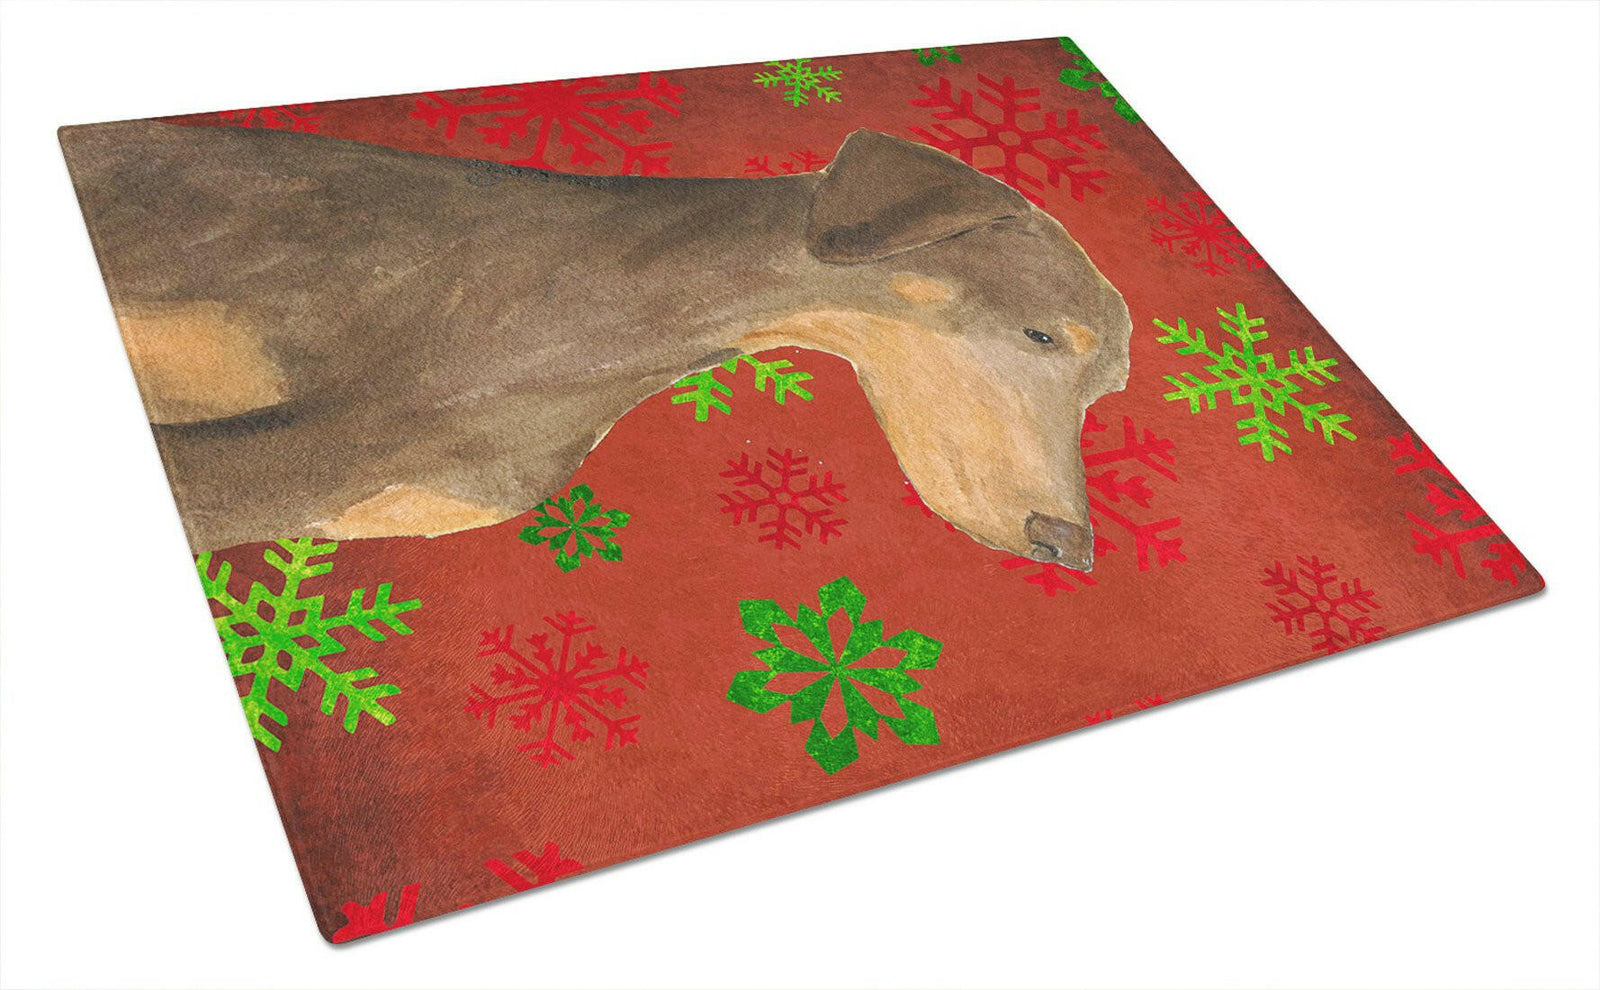 Doberman Red and Green Snowflakes Holiday Christmas Glass Cutting Board Large by Caroline's Treasures